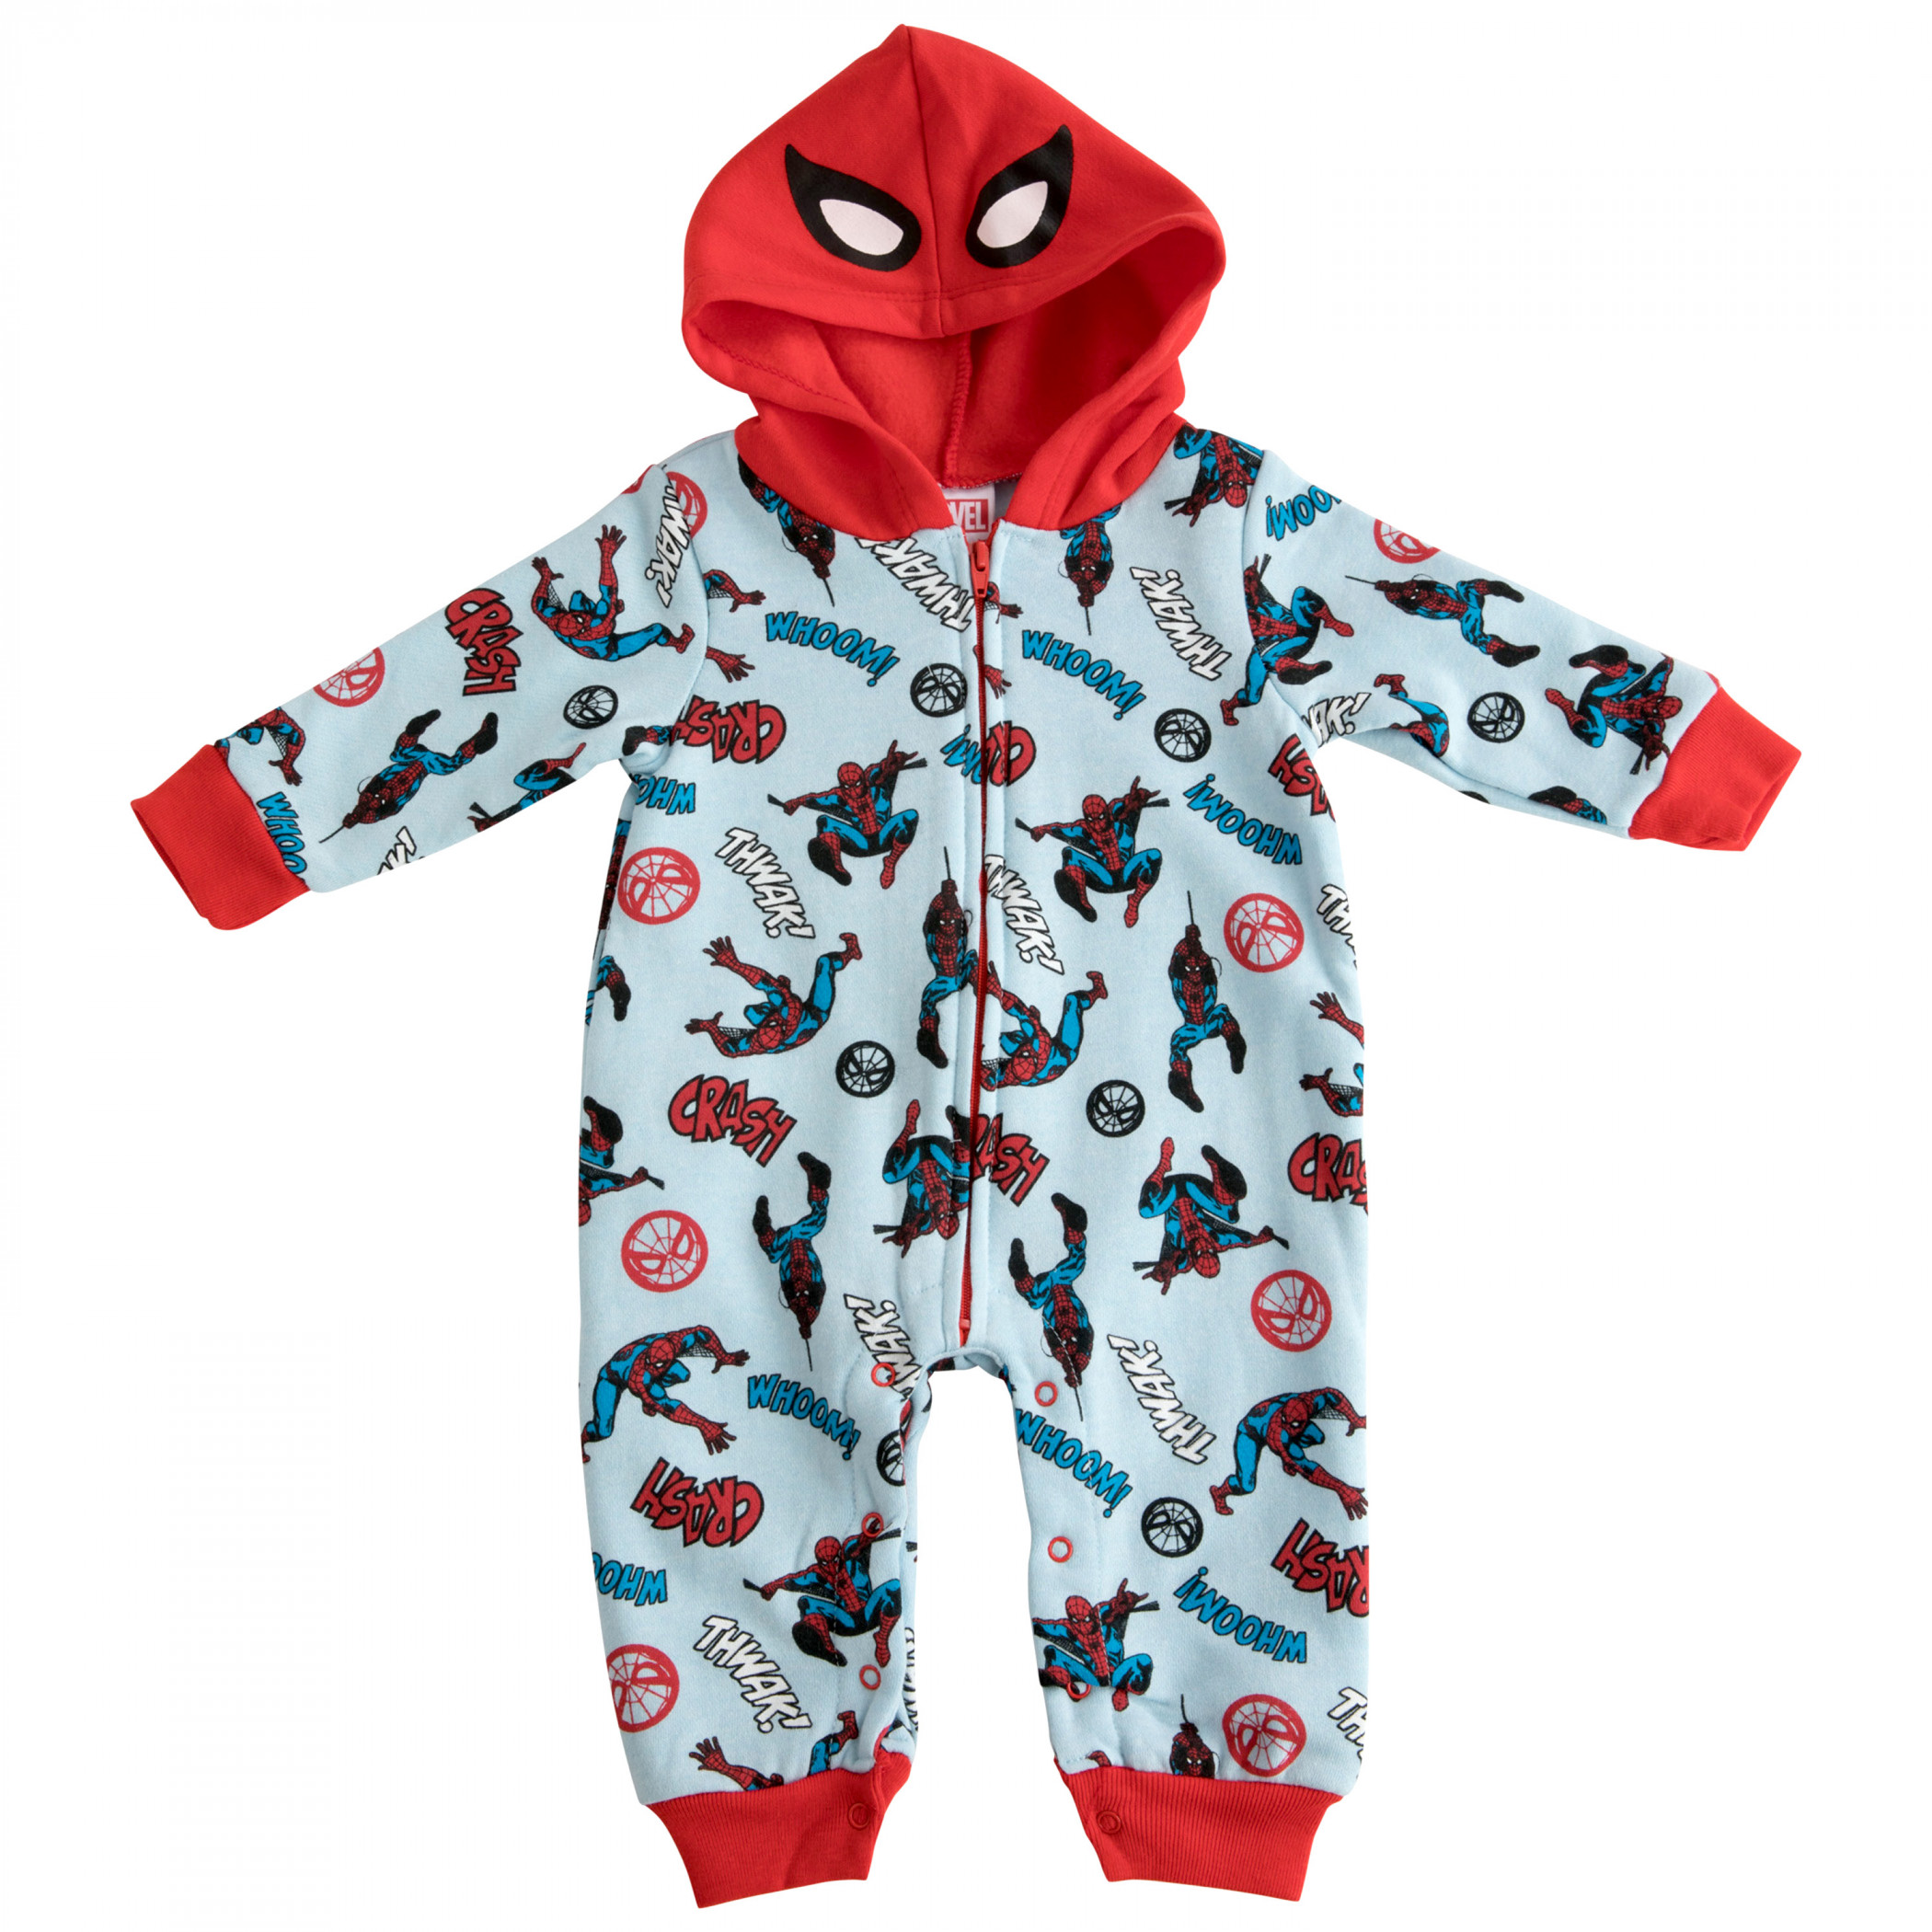 Spider-Man Comic Poses Infant Hooded Fleece Coveralls